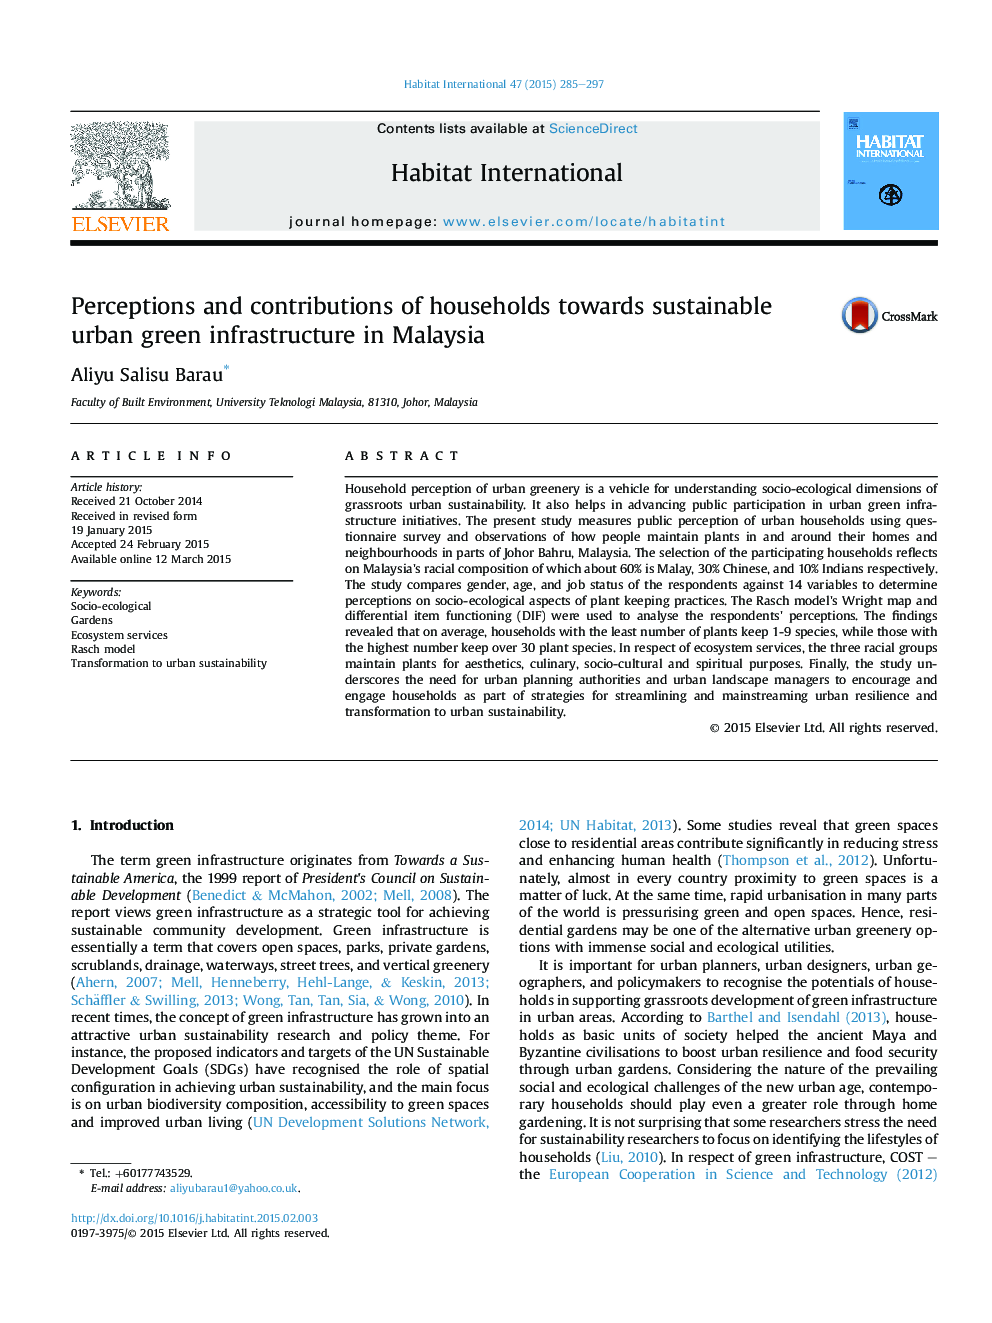 Perceptions and contributions of households towards sustainable urban green infrastructure in Malaysia